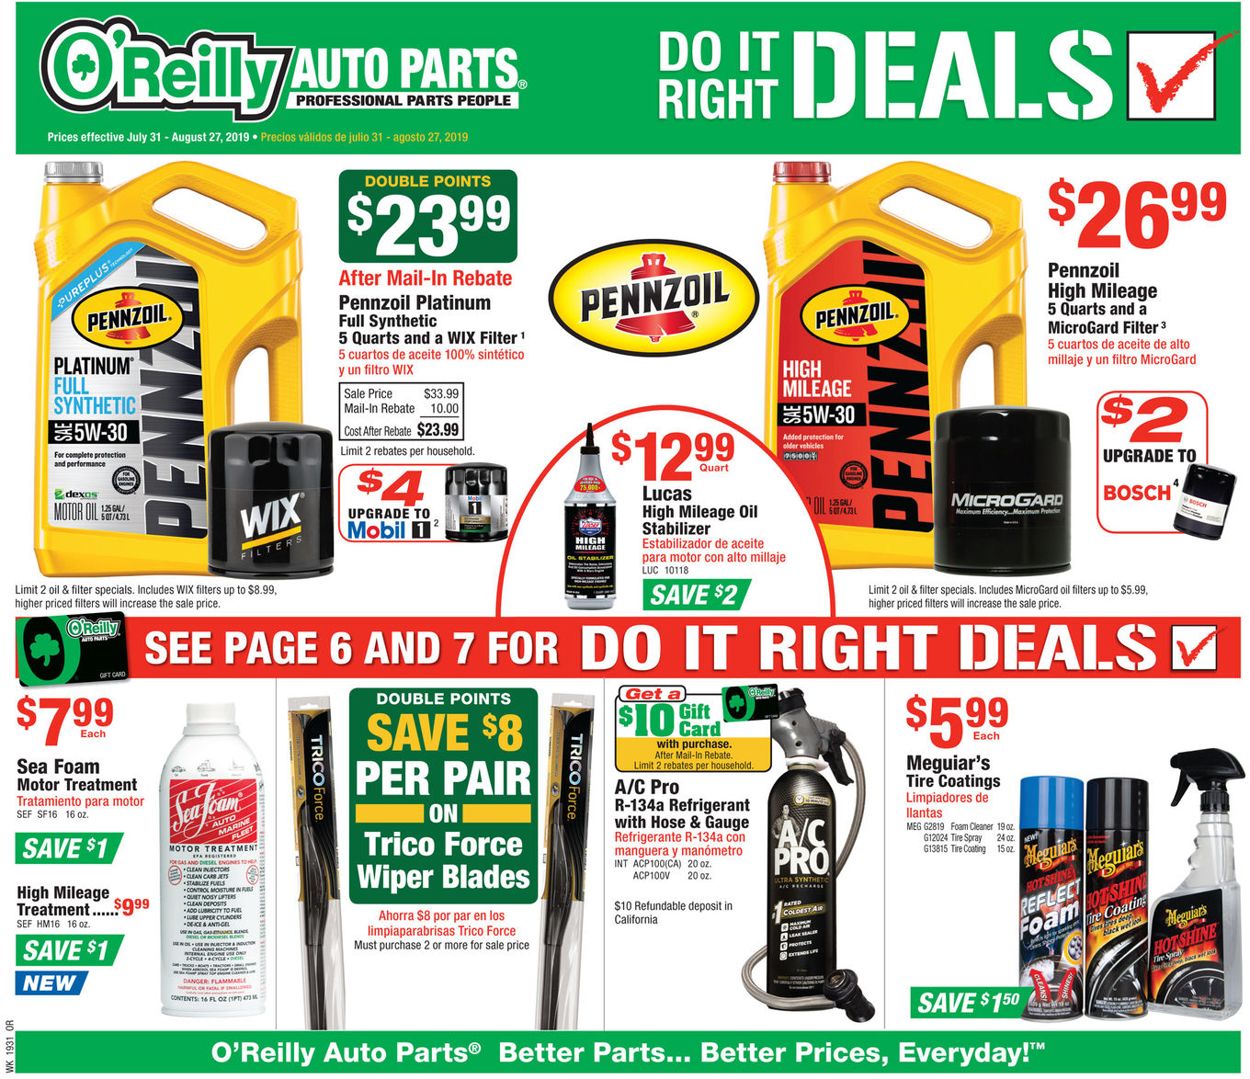 o-reilly-auto-parts-current-weekly-ad-07-31-08-27-2019-frequent-ads